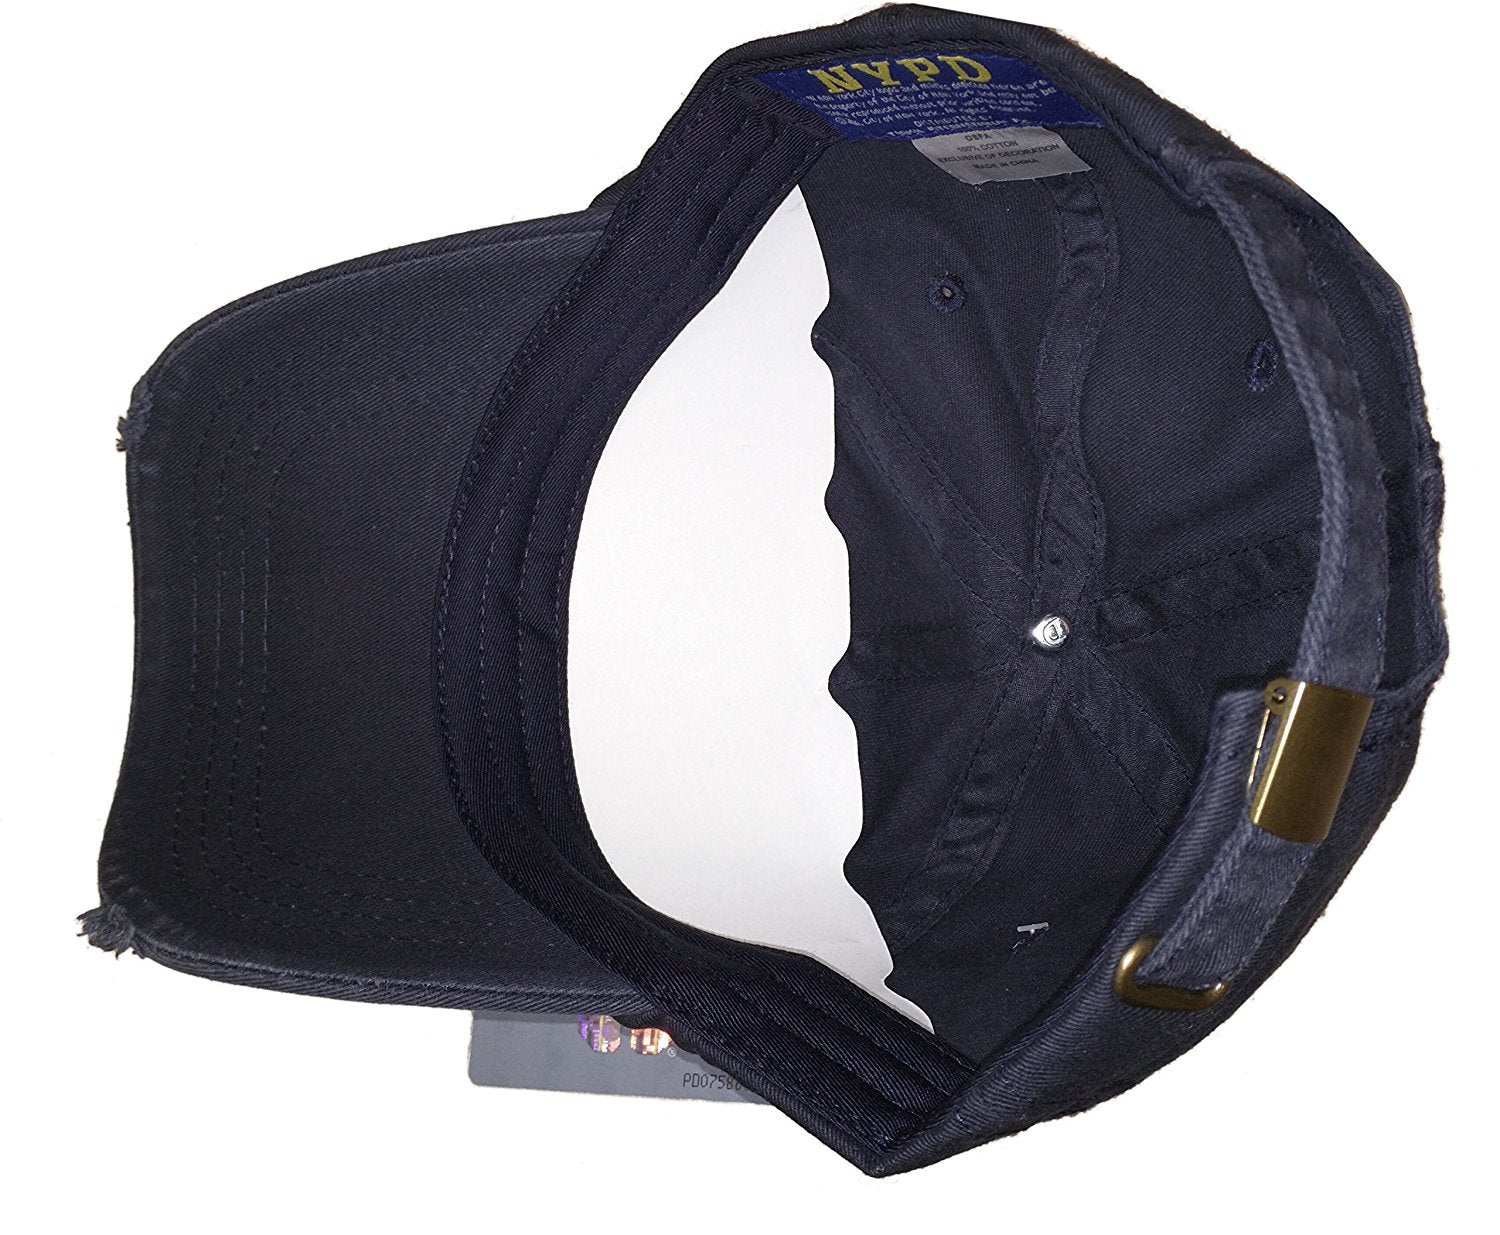 NYPD Baseball Hat New York Police Department Big Gold Distressed Navy Blue